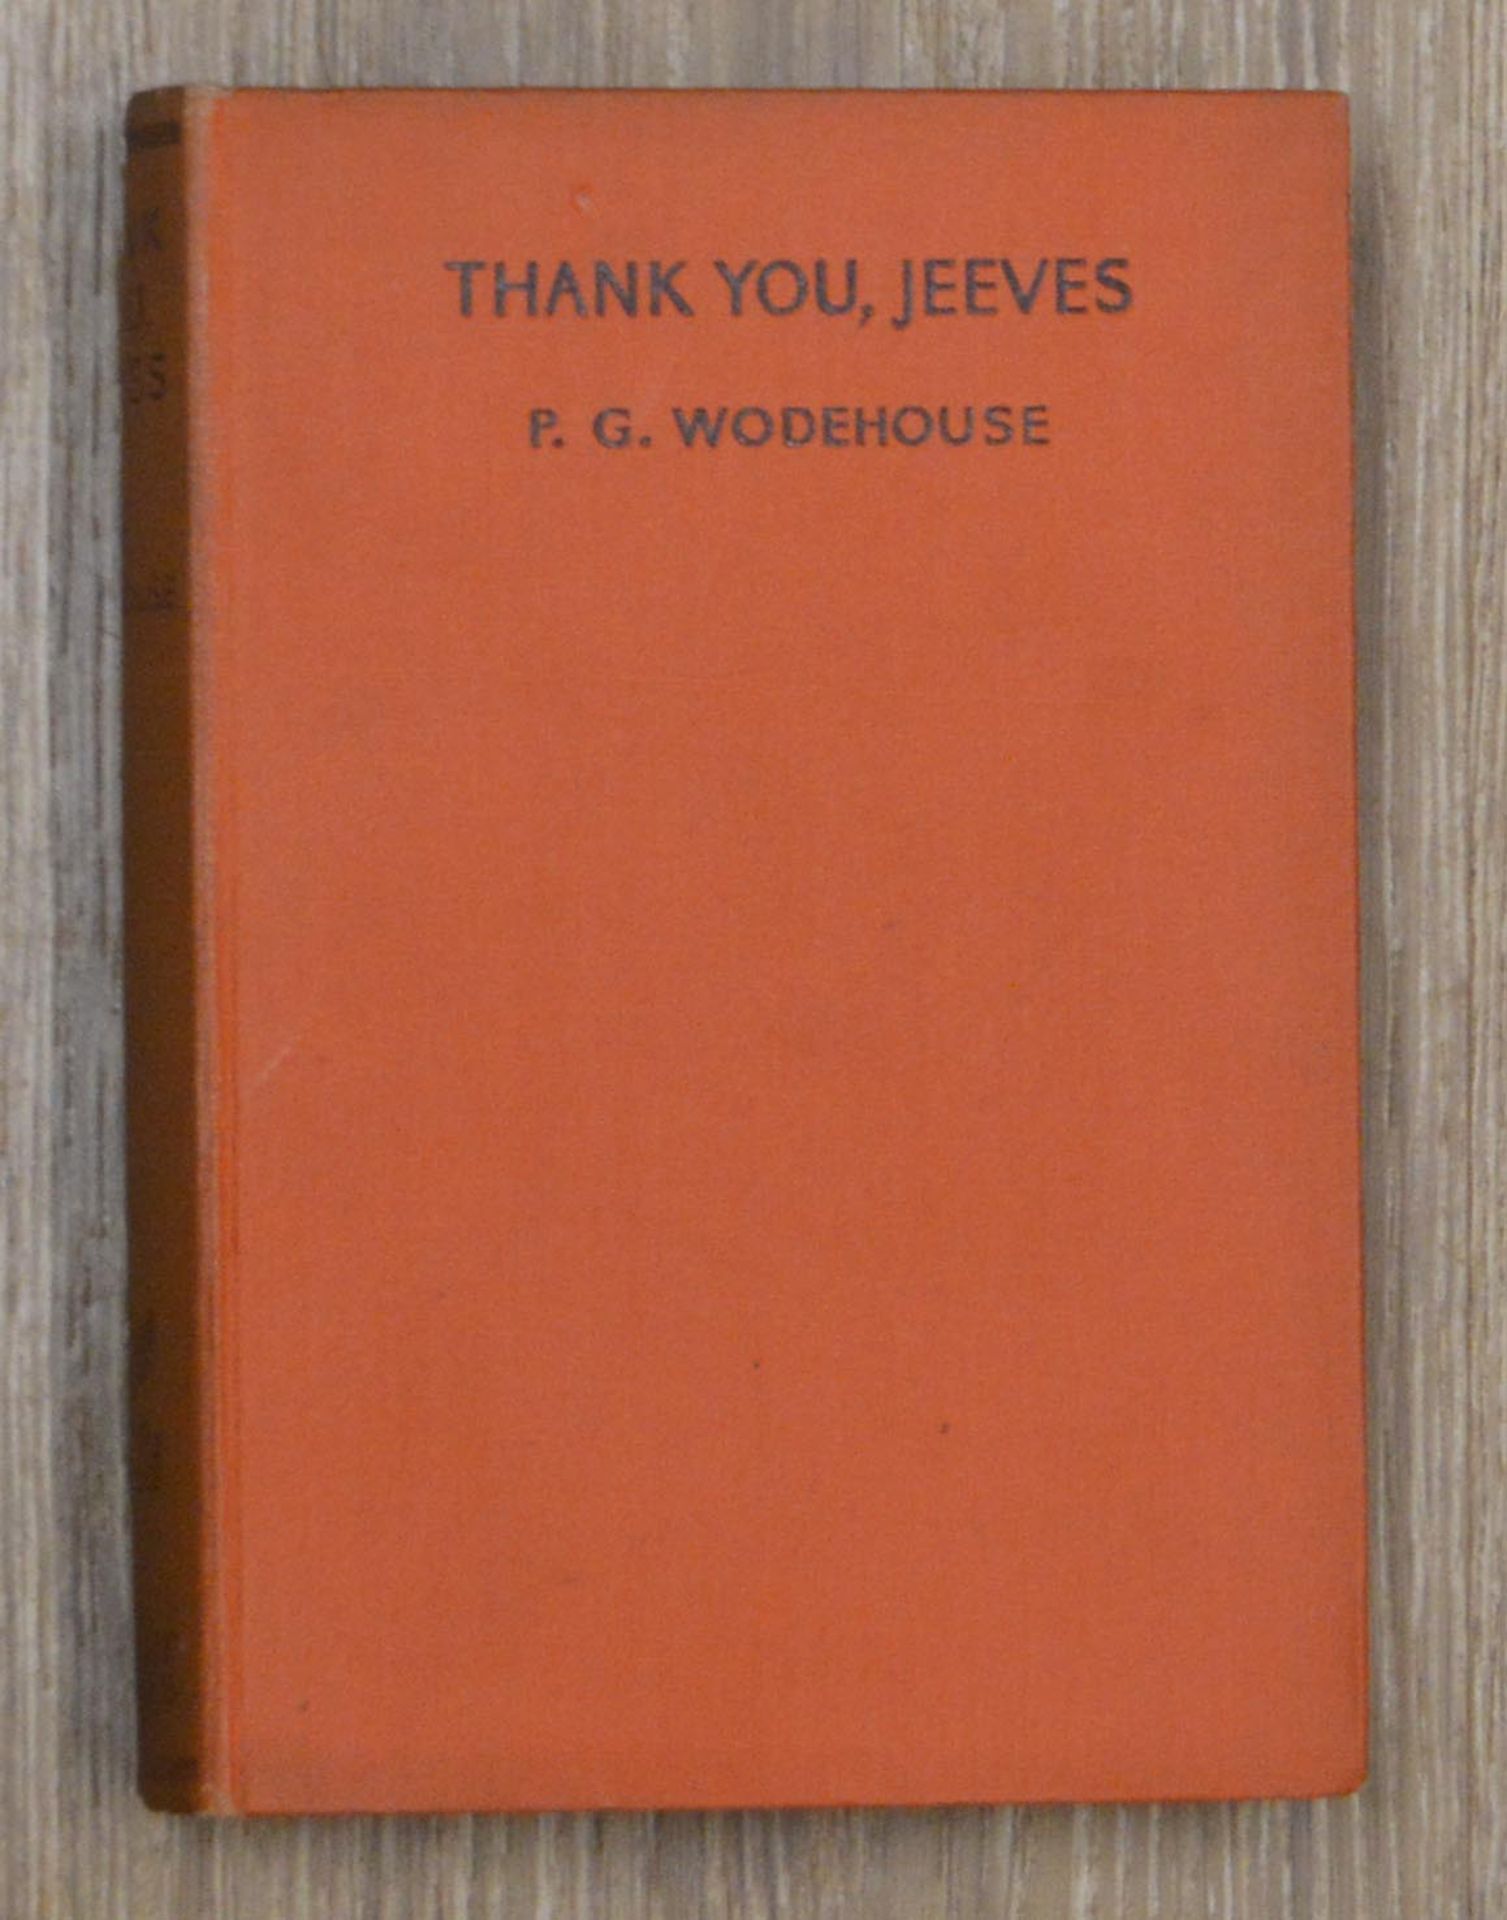 [Books] P.G.Wodehouse Thank You Jeeves 4th Printing VG Condition